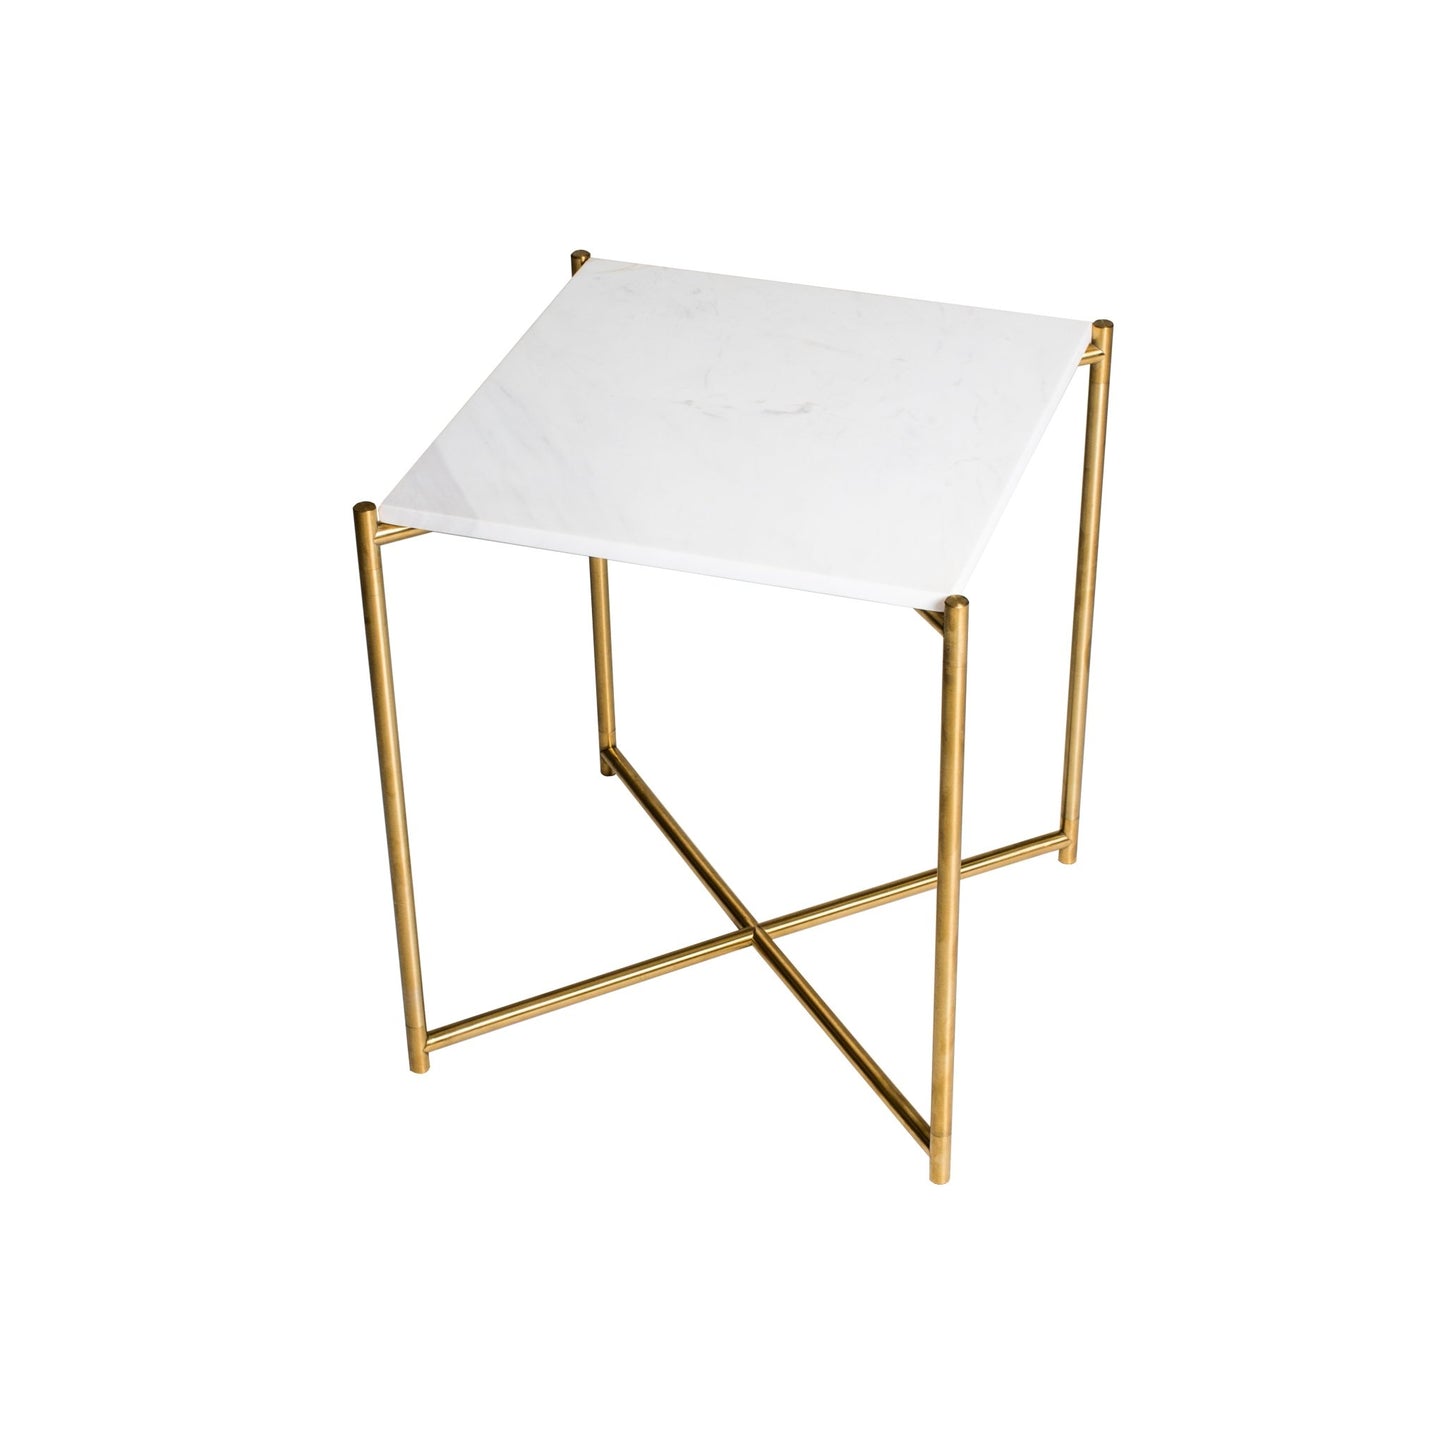 Iris Square Side Table - White Marble & Brass Frame